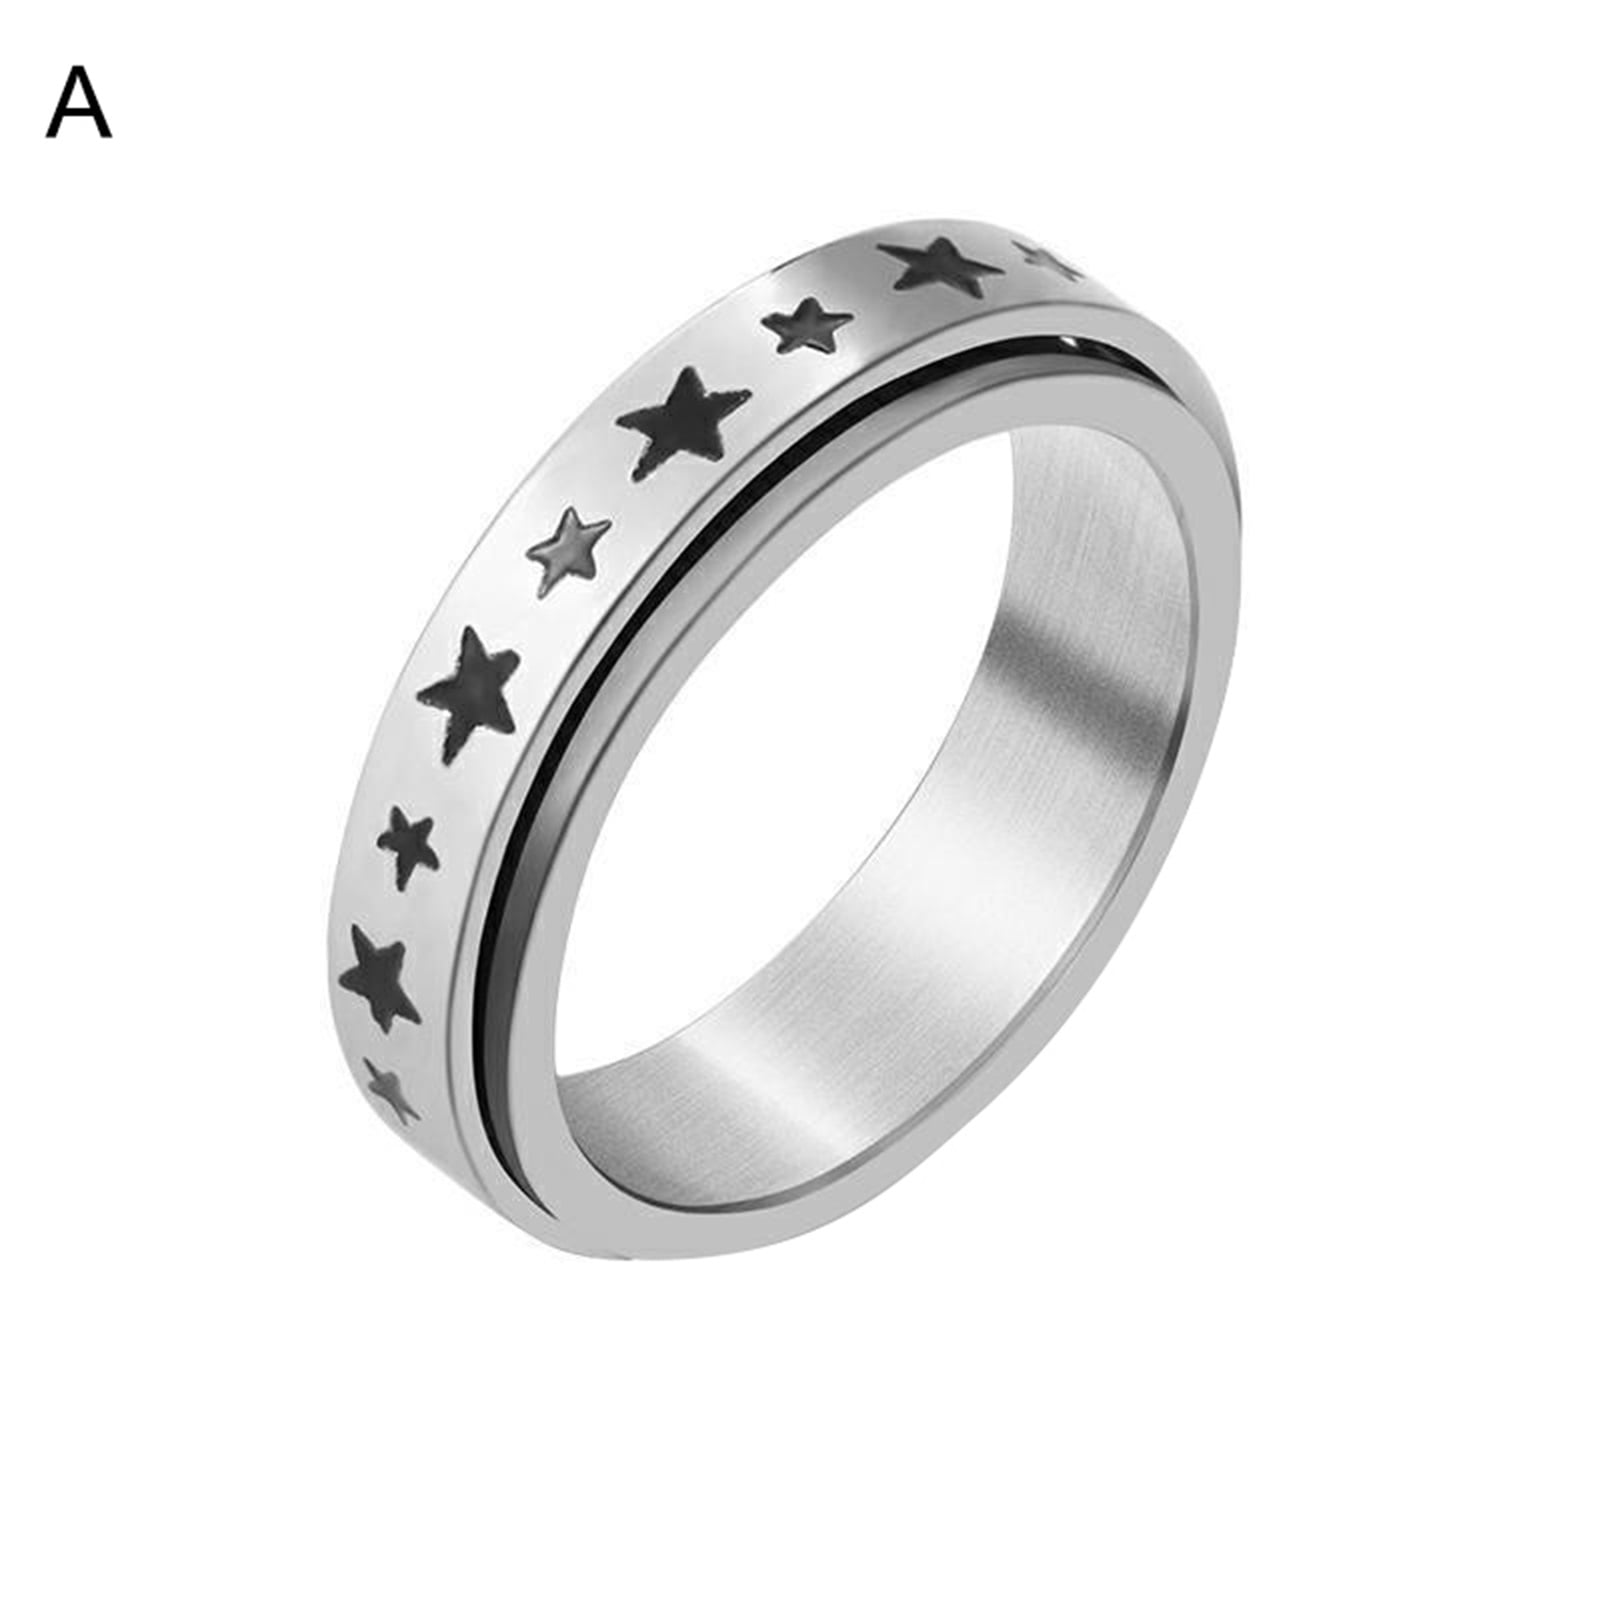 Dropship 6 Pcs Stainless Fidget Rings For Women Mens Spinner Rings For  Stress Relieving Sand Blast Finish Flower Moon Star Anxiety Ring Set For  Band Rings Size 10 to Sell Online at